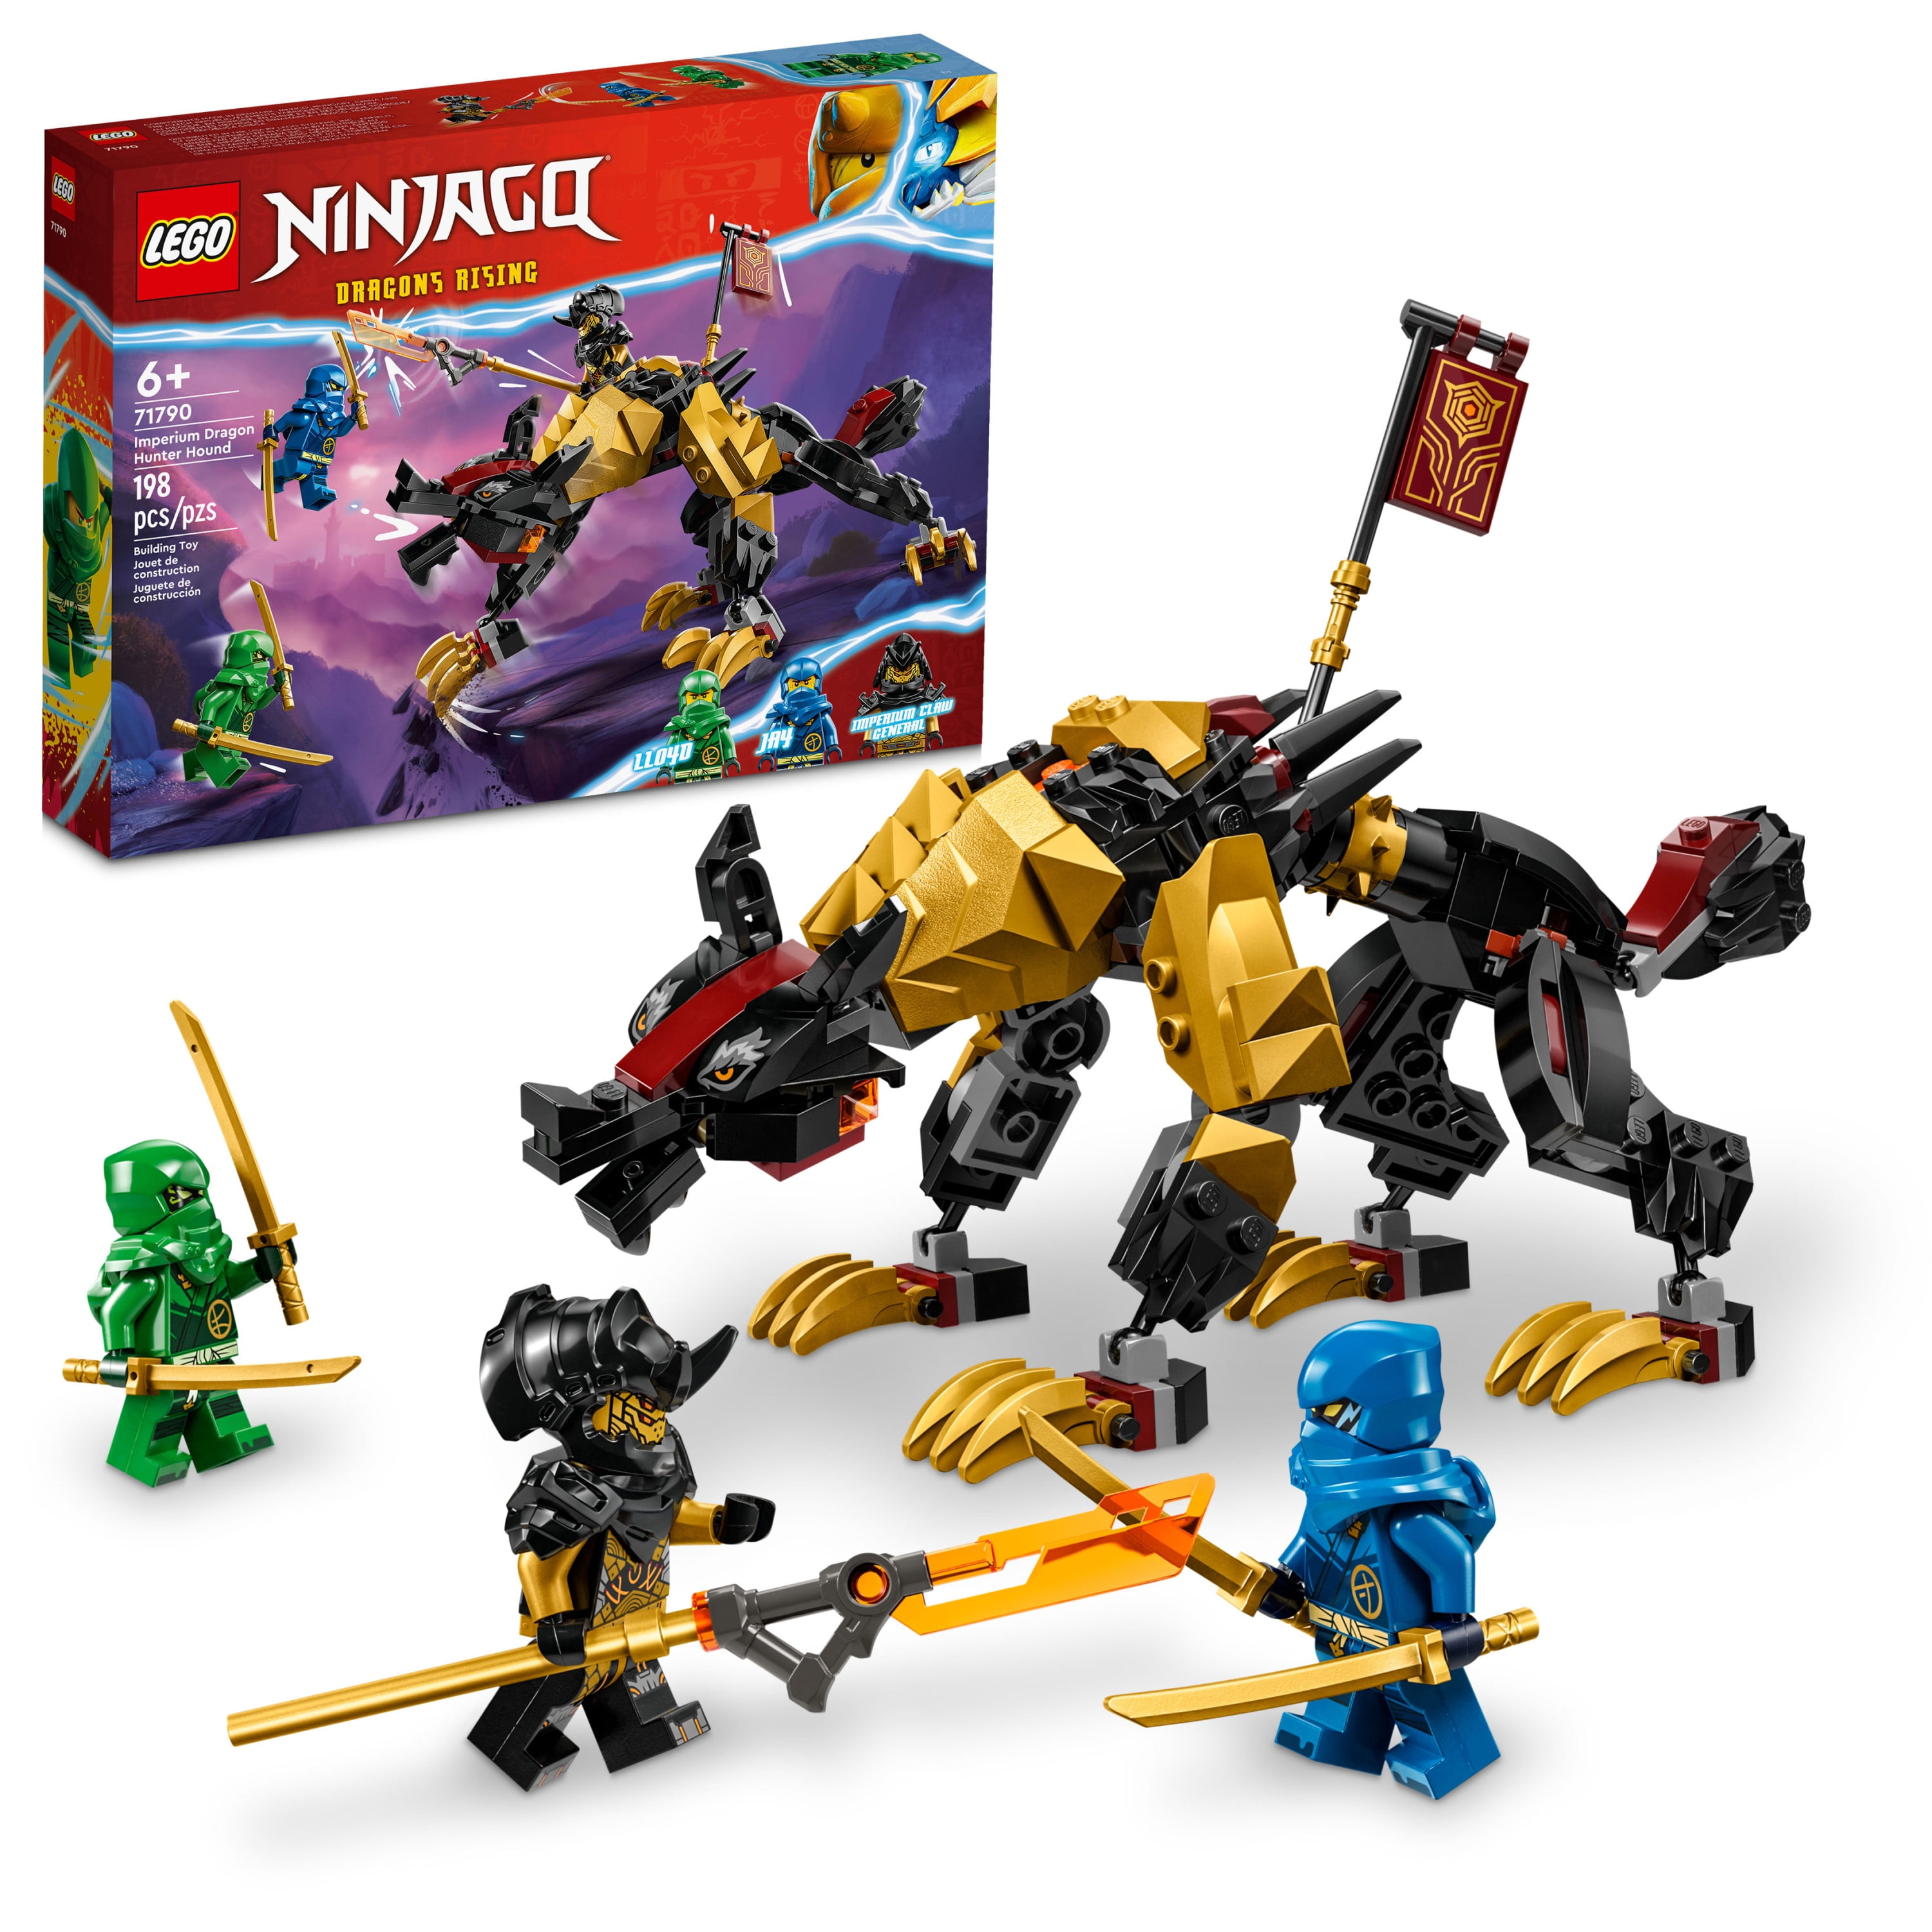 planer Vulkan Gå tilbage LEGO NINJAGO Imperium Dragon Hunter Hound 71790 Building Set Featuring  Monster and Dragon Toys and 3 Minifigures, Great Ninja Toys for Kids Ages  6+ Who Love to Play Out Ninja Stories - Walmart.com